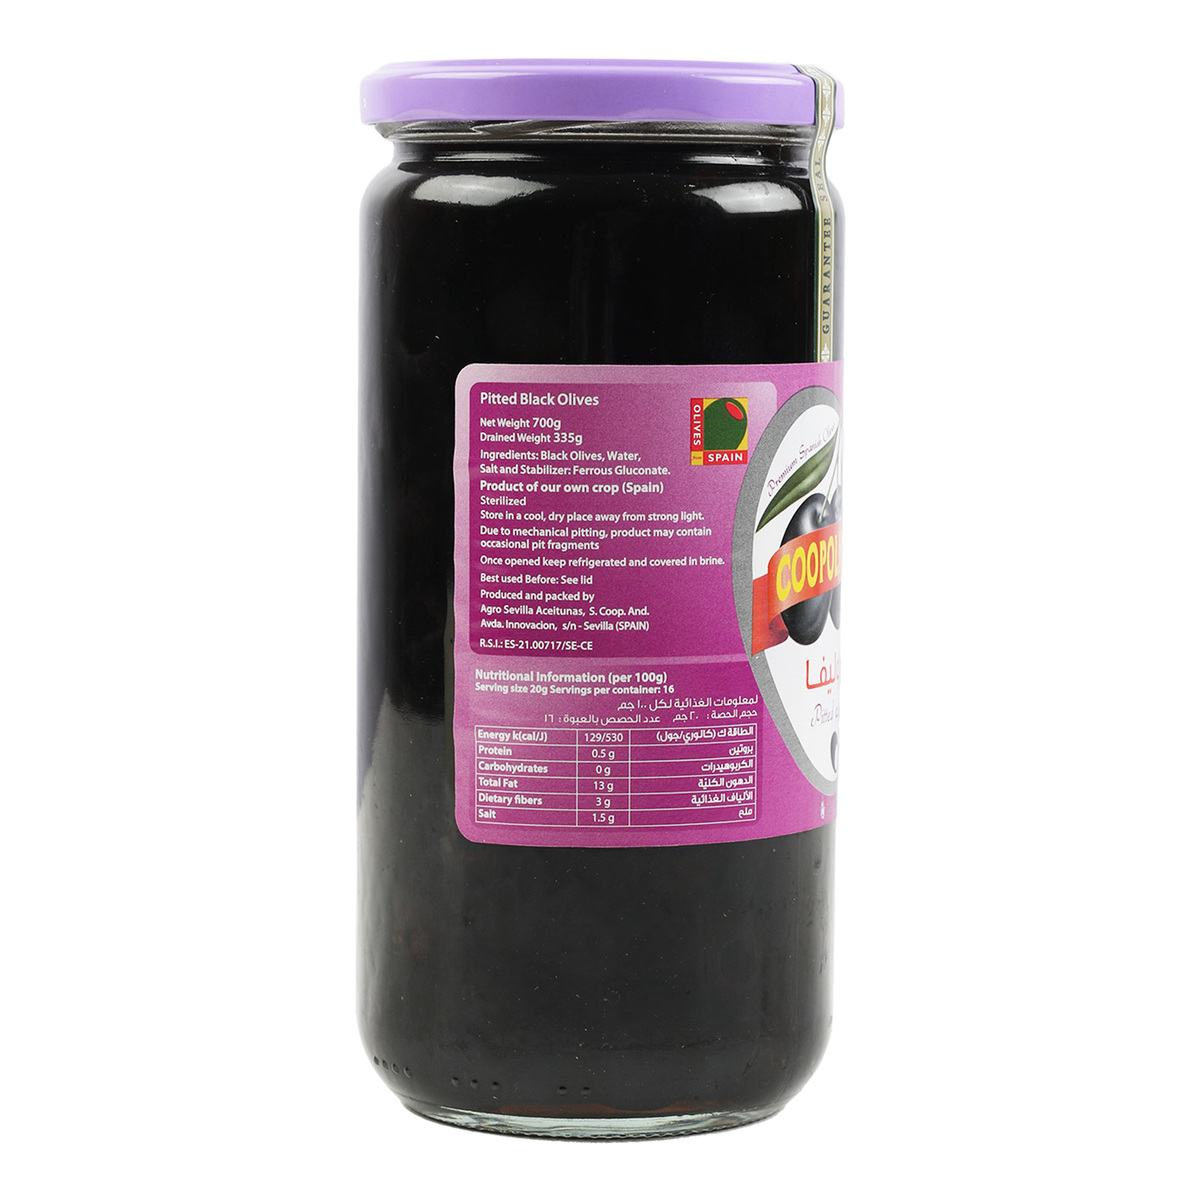 Coopoliva Spanish Pitted Black Olives 700g